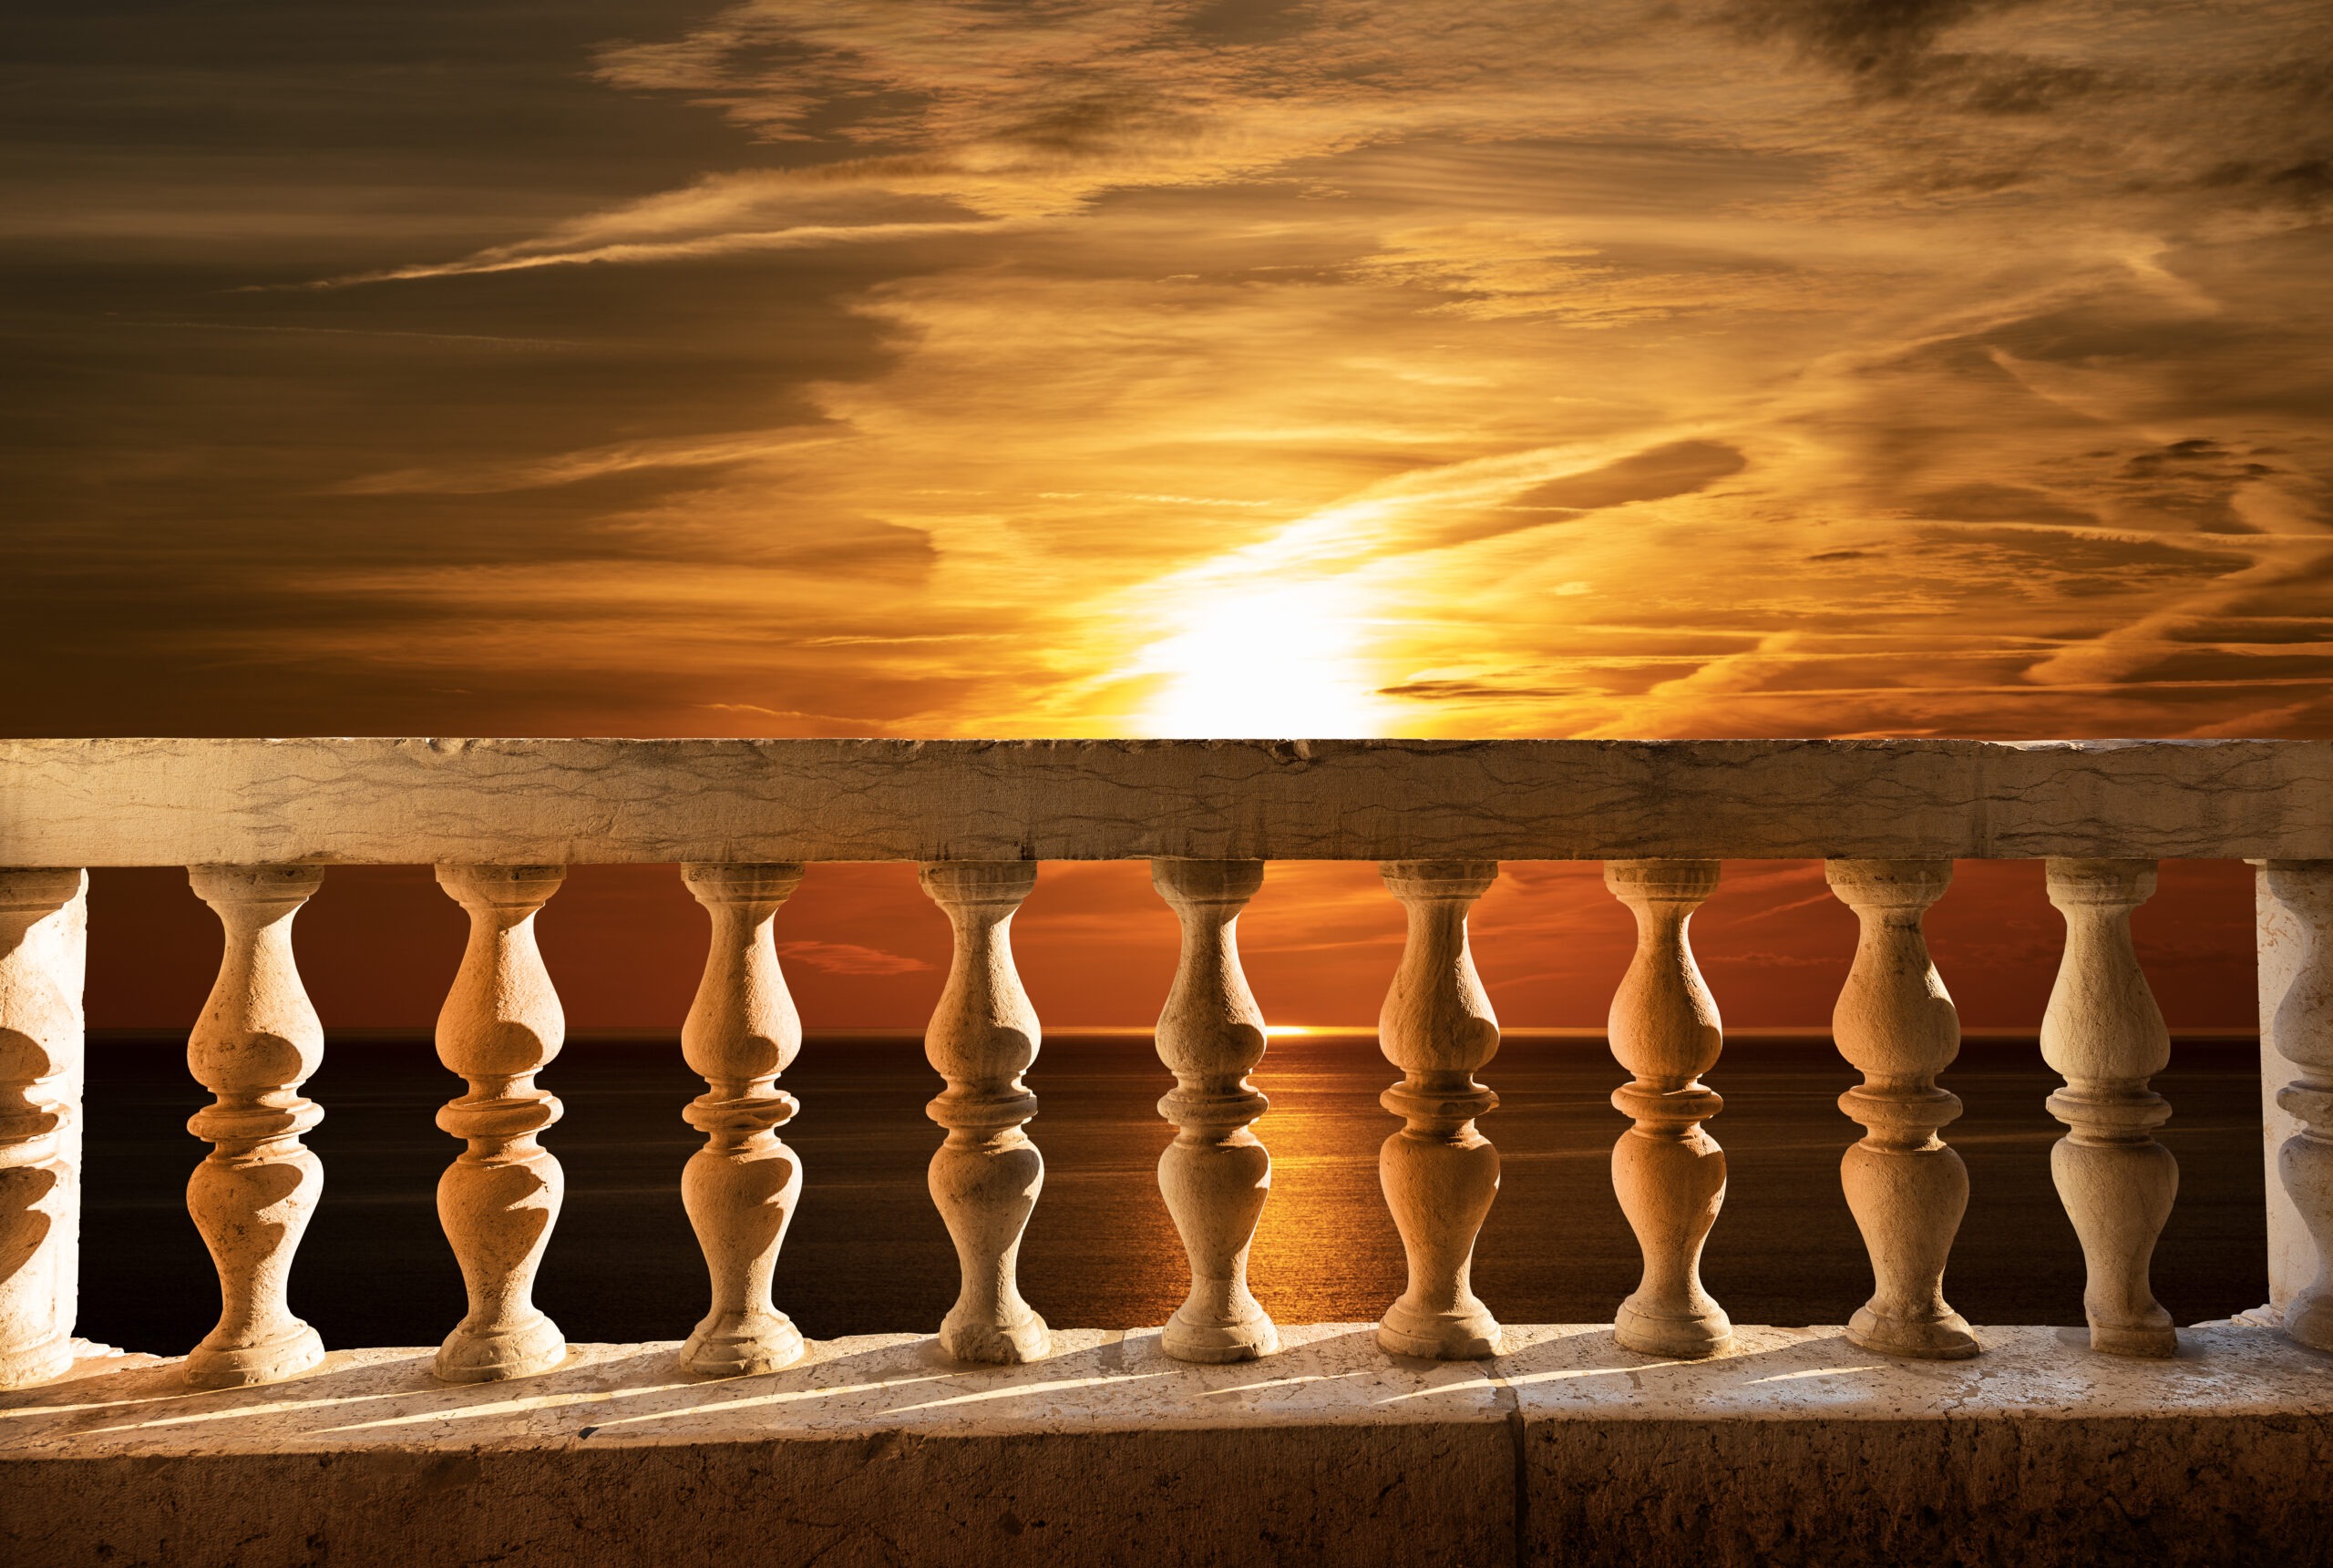 Marble Balustrade with Seascape at Sunset